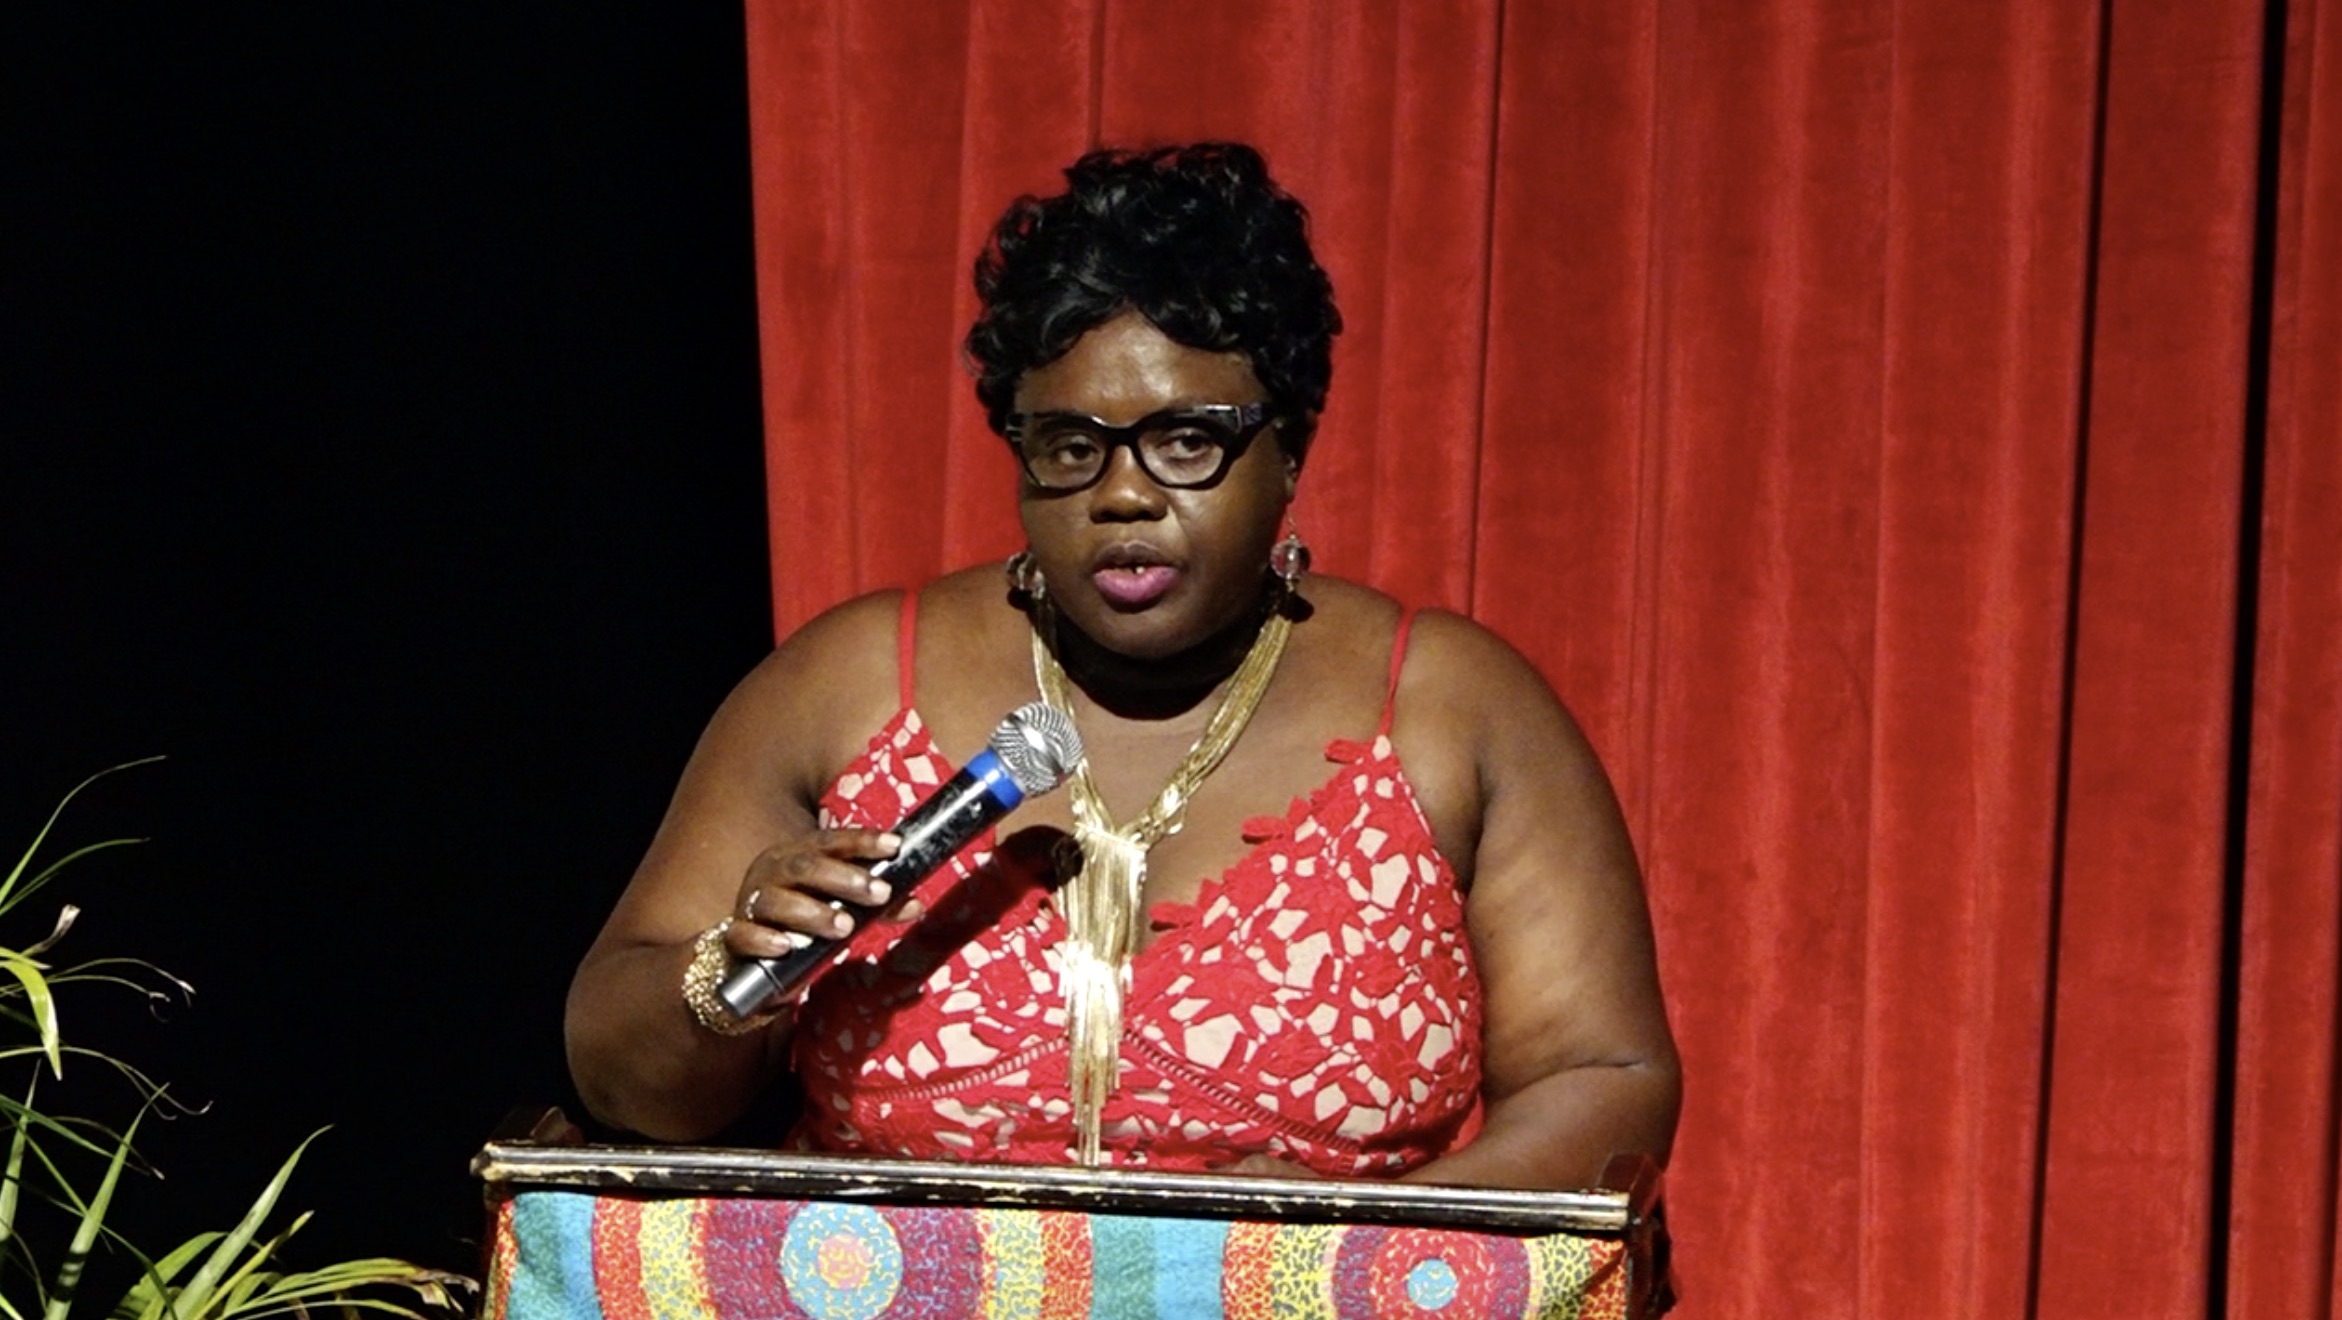 Hon. Hazel Brandy-Williams, Junior Minister of Health in the Nevis Island Administration, delivering remarks at the Recognition and Cocktail Ceremony hosted by the Nevis Nurses Association at the Nevis Performing Arts Centre on May 15, 2021